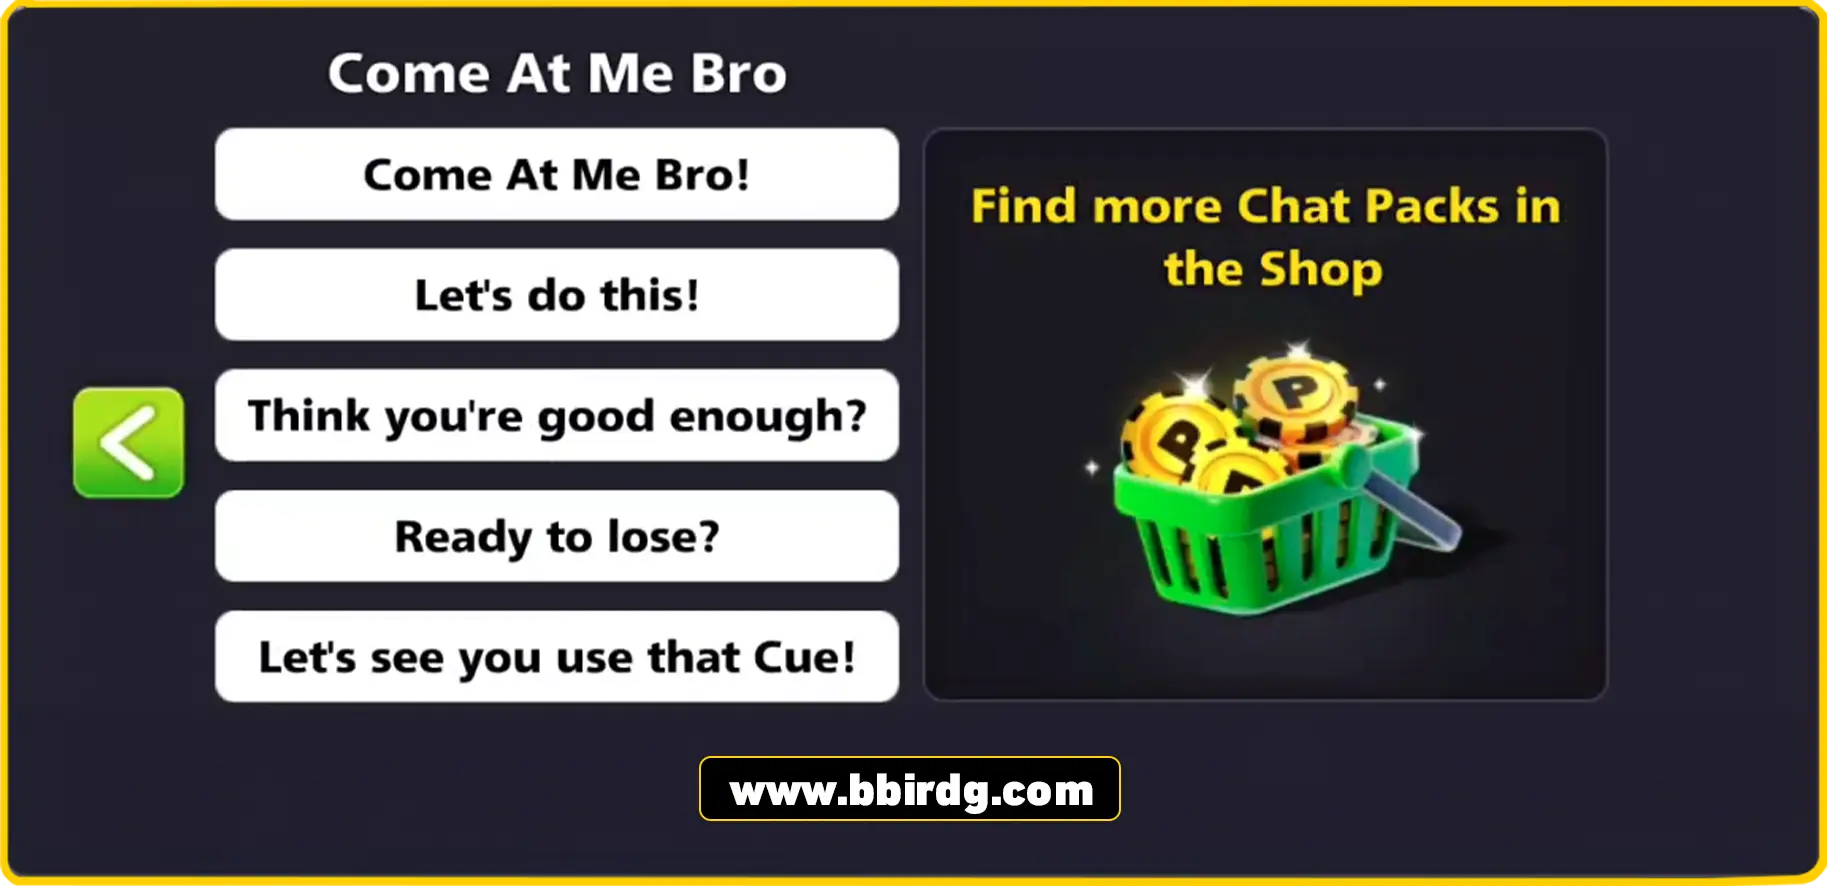 Chat Pack - Come At Me Bro | 8 Ball Pool - BlackBird Store